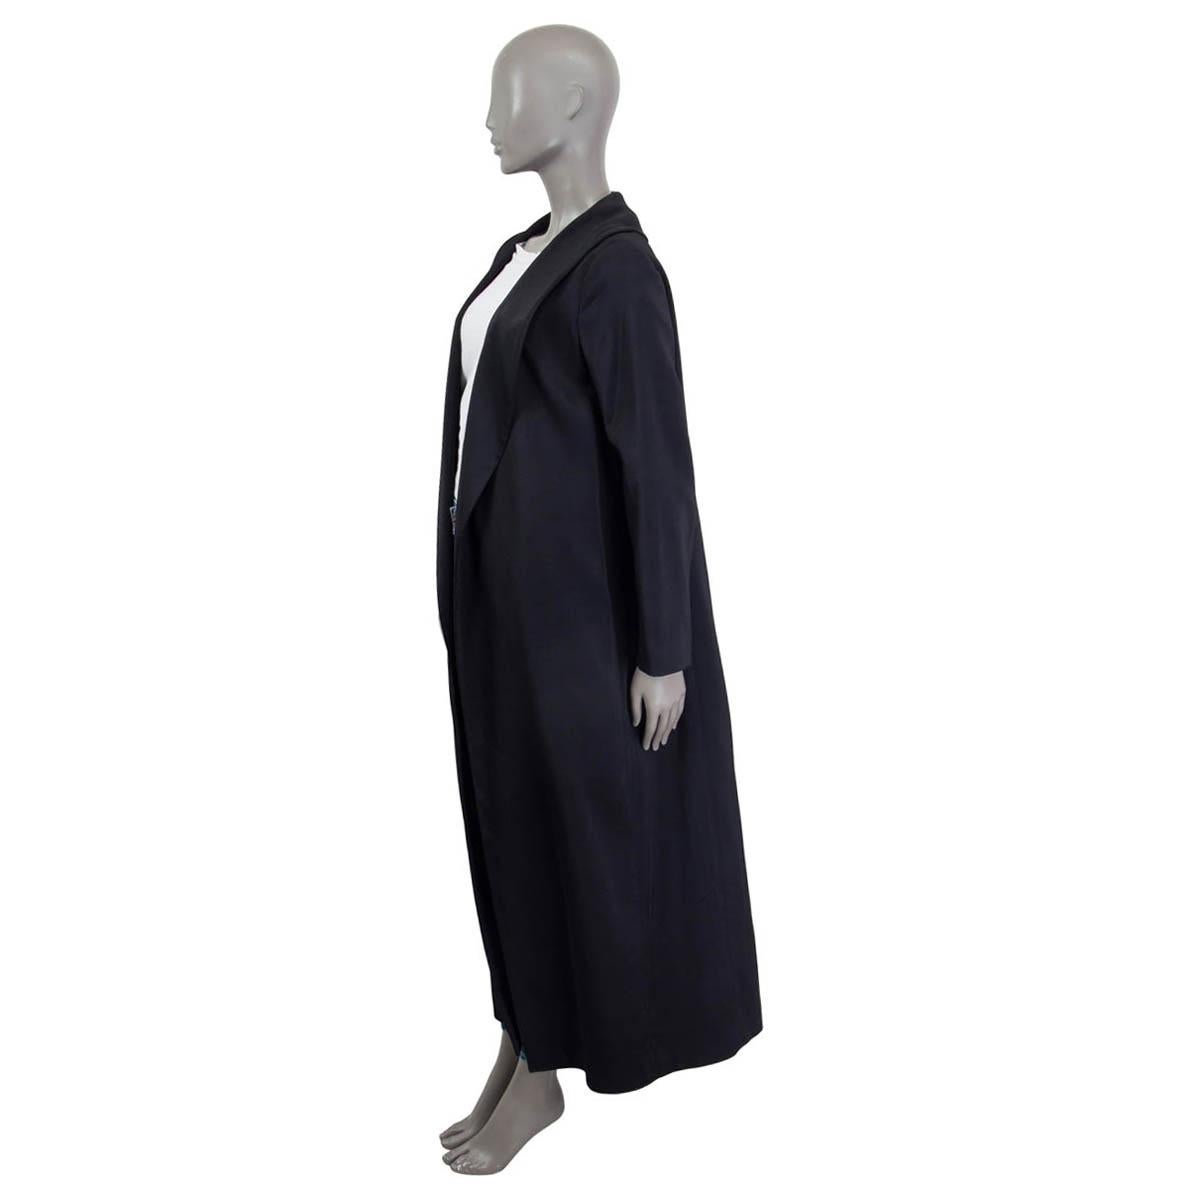 100% authentic The Row shawl collar open coat in black viscose (assumed cause tag is missing). Features two slit pockets and a slit at the back. Semi lined in black silk (assumed cause tag is missing). Has been worn and is in excellent